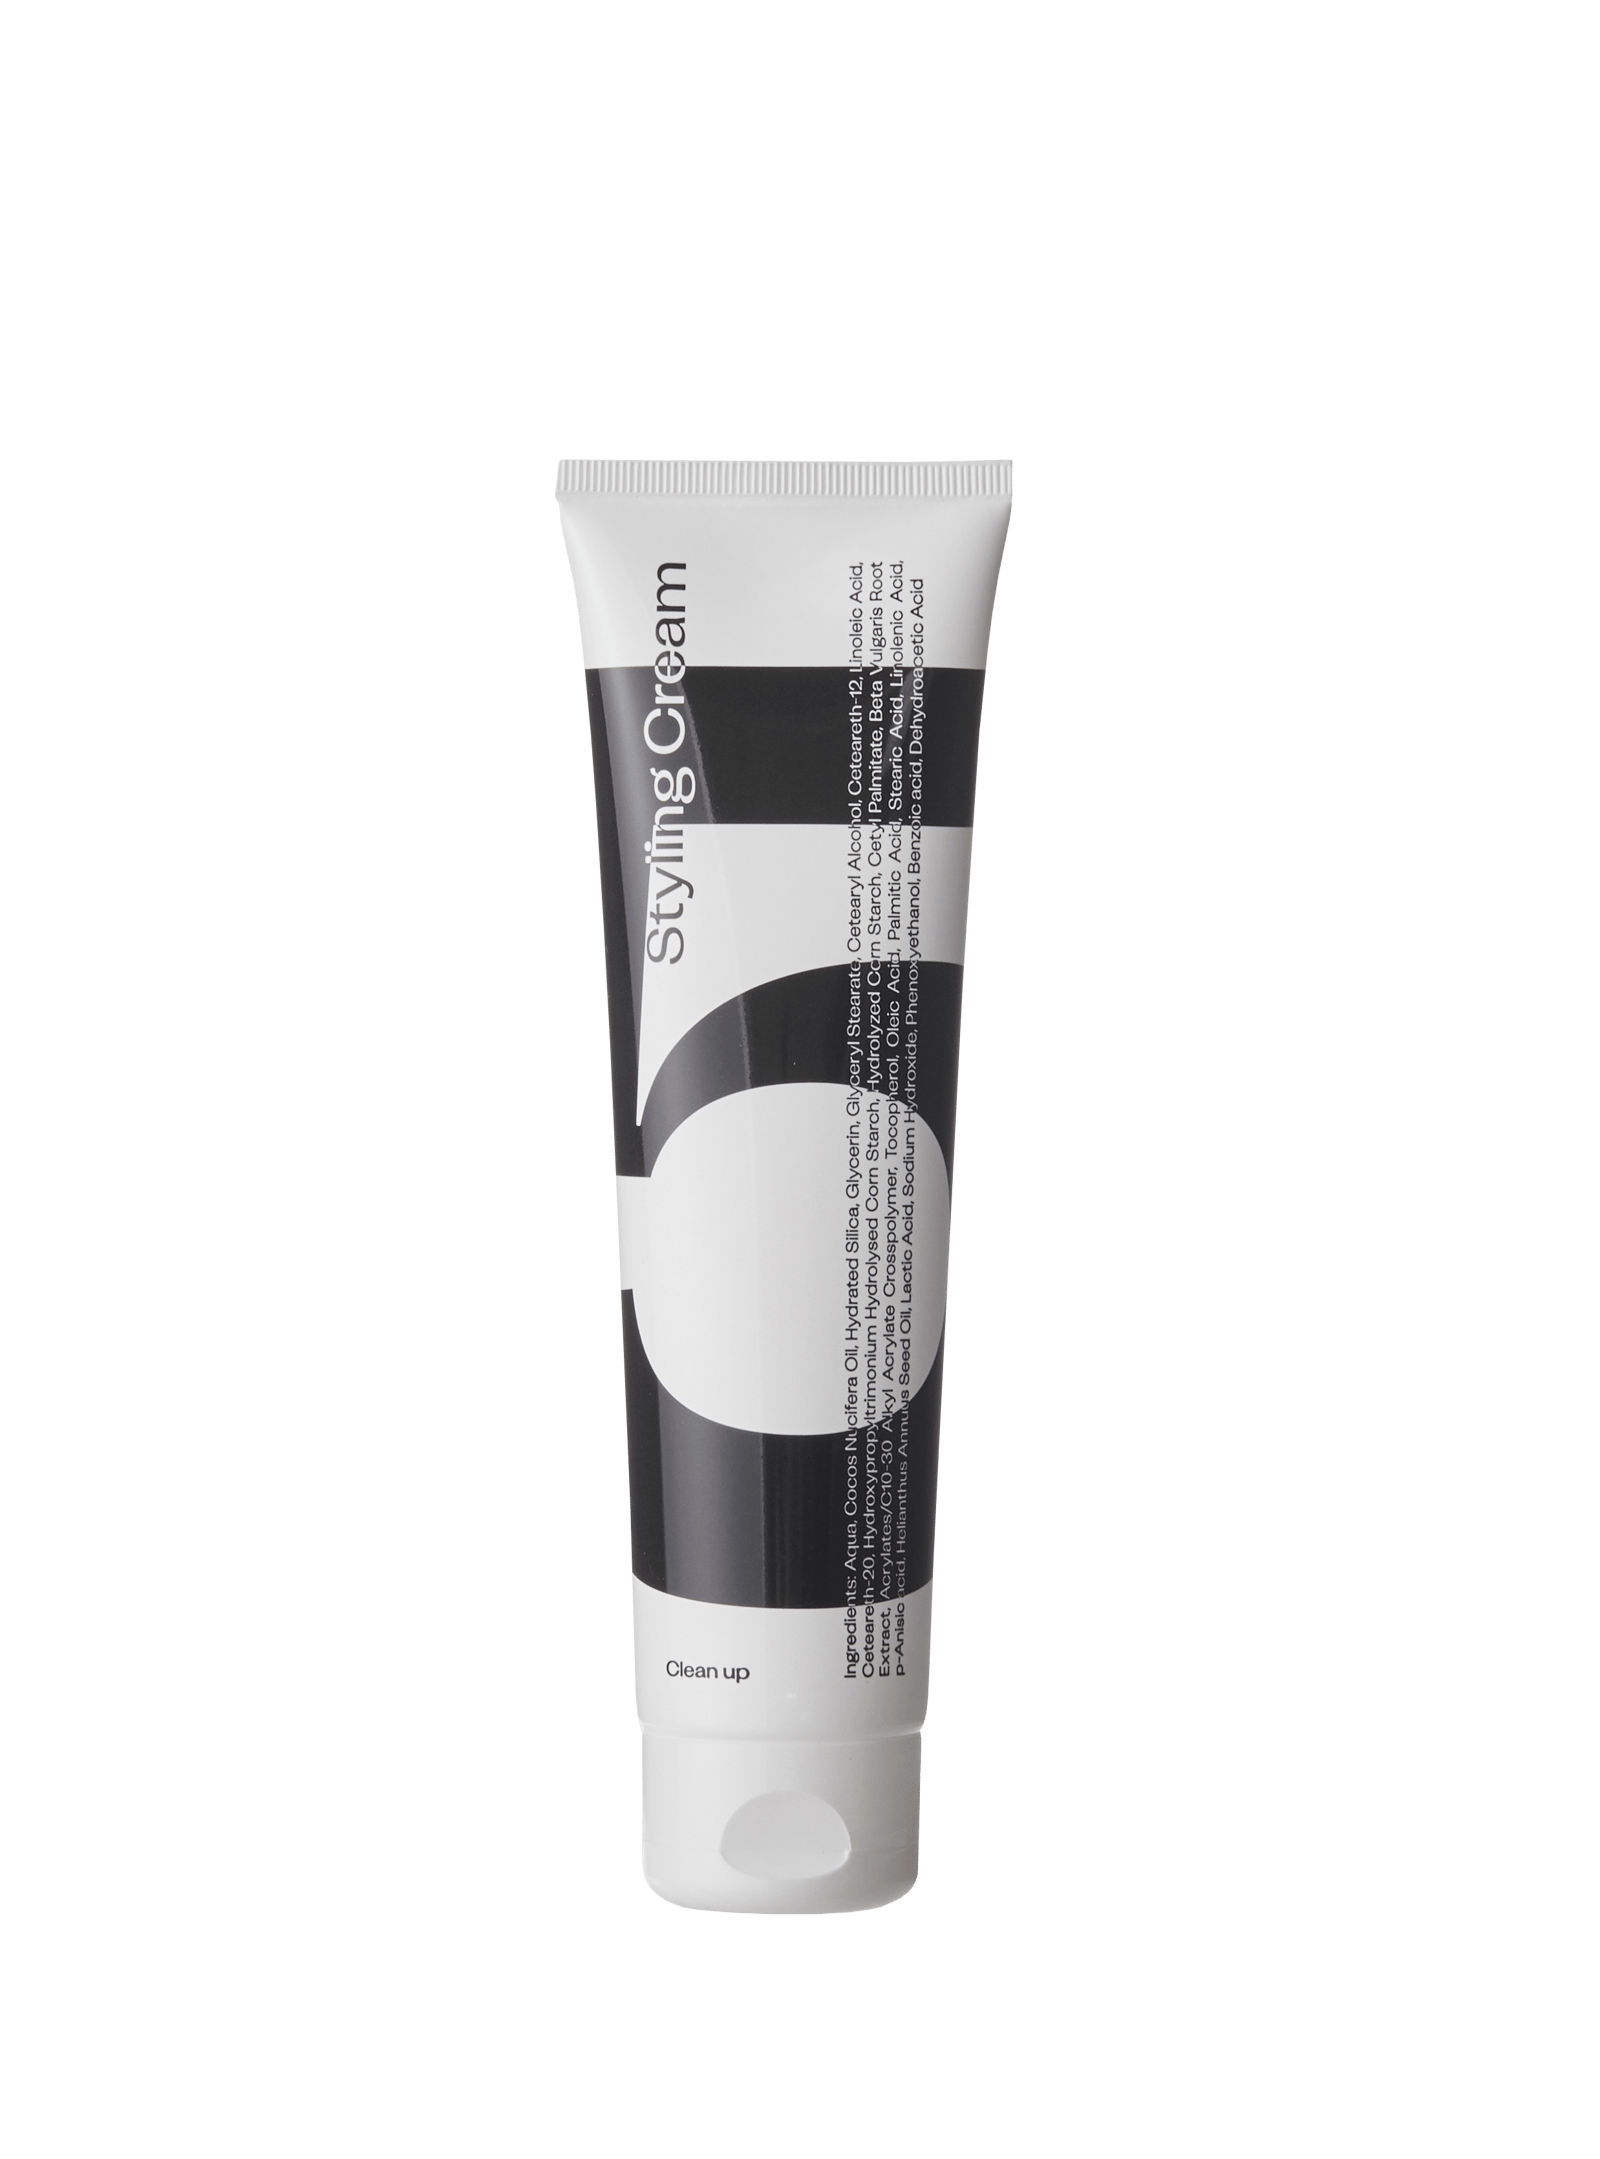 Clean up Styling Cream 150 ml